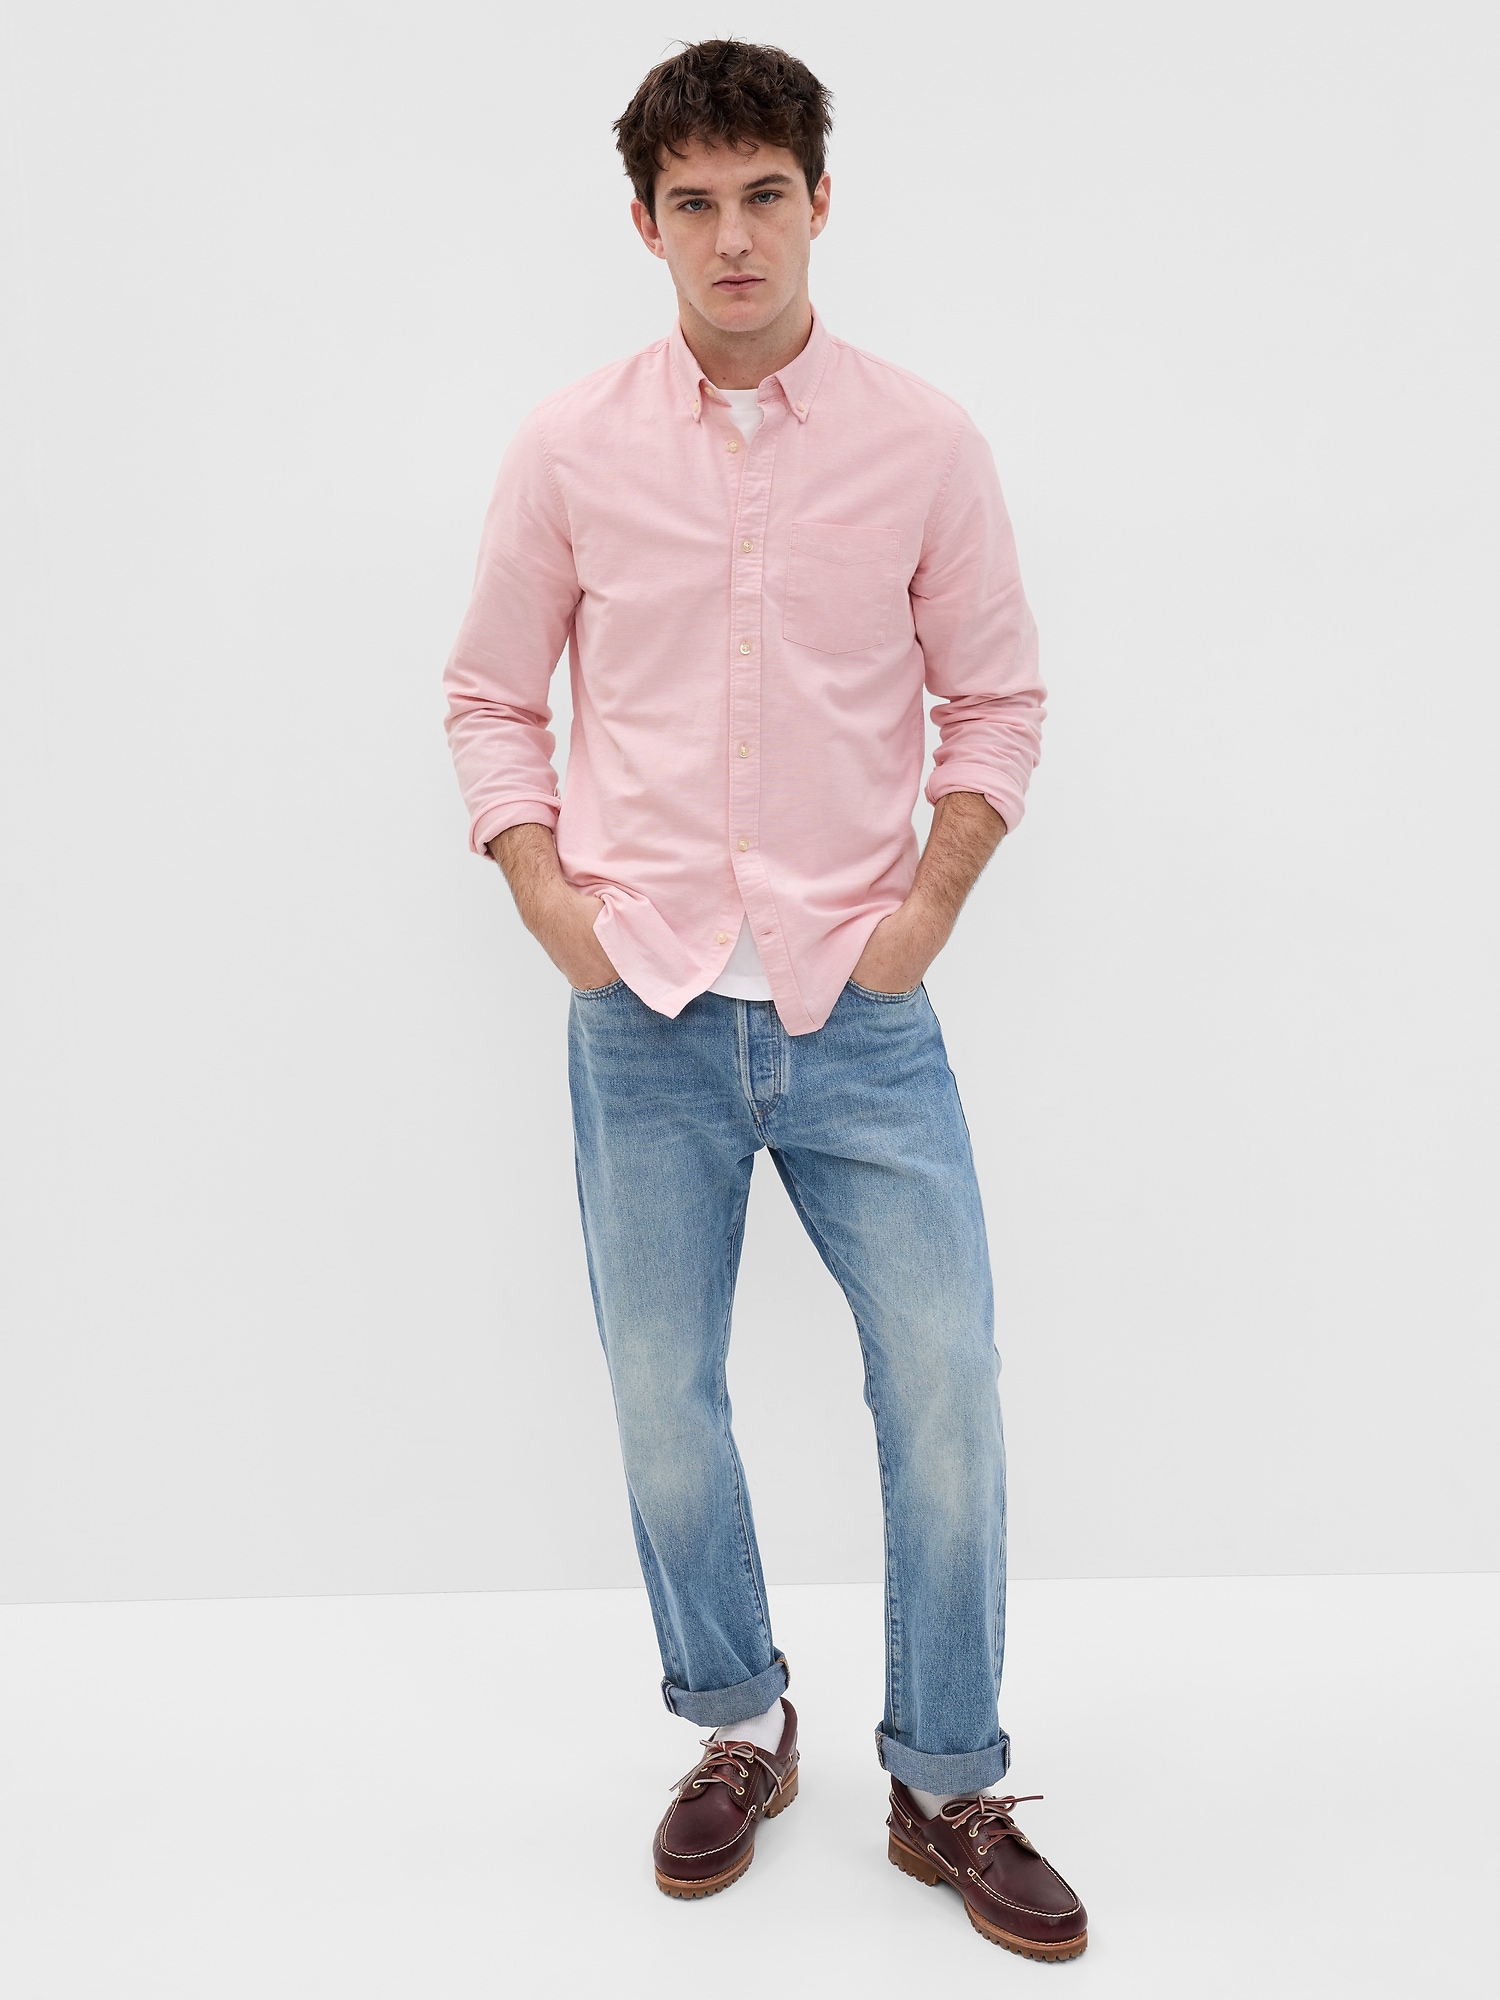 Gap Classic Oxford Shirt In Standard Fit With In-conversion Cotton In Pink